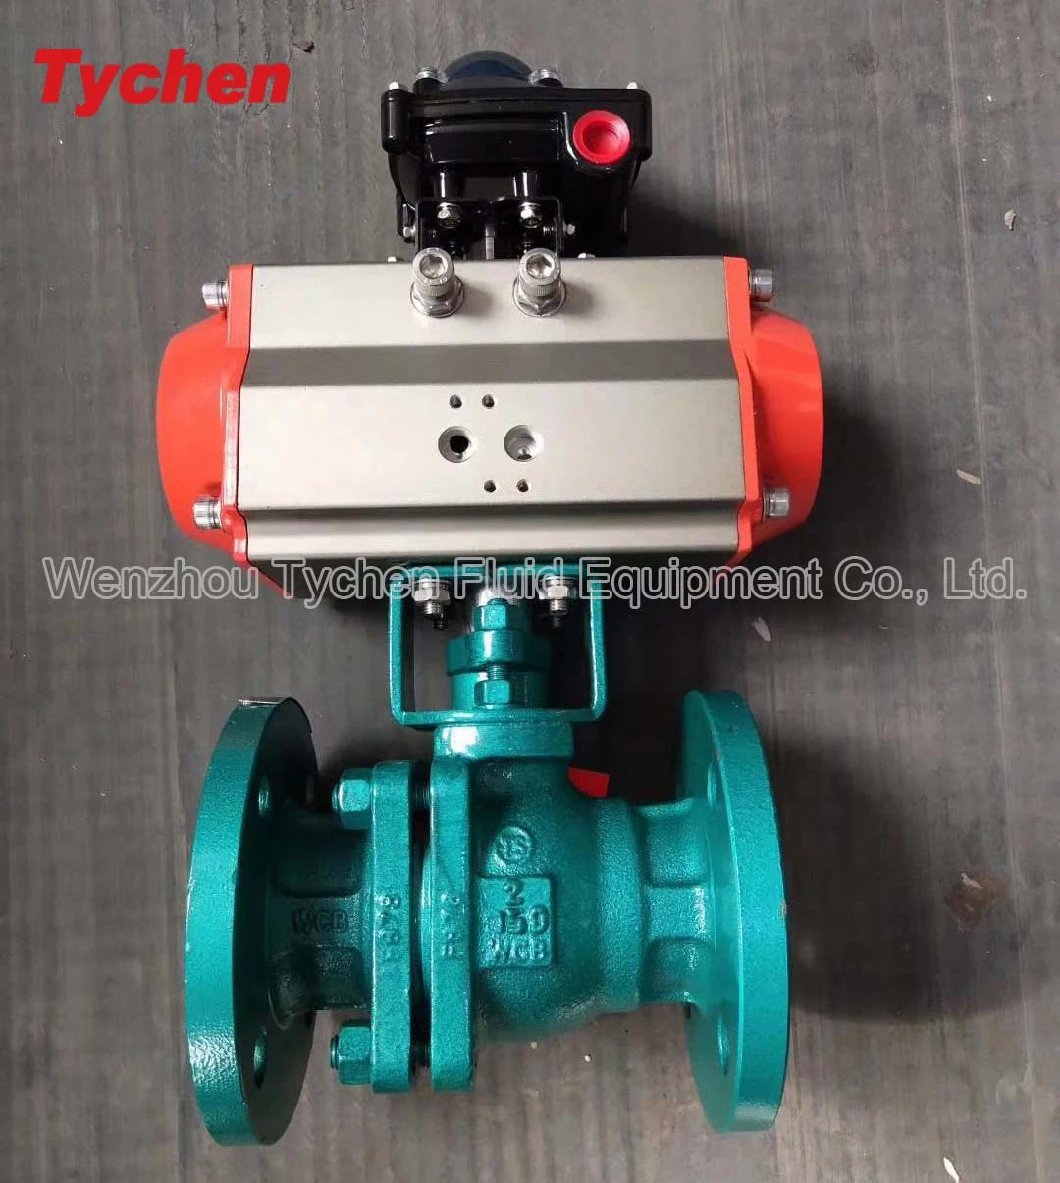 Apl210 Series Limit Switch Box for Pneumatic Actuator Ball Valve Butterfly Valve